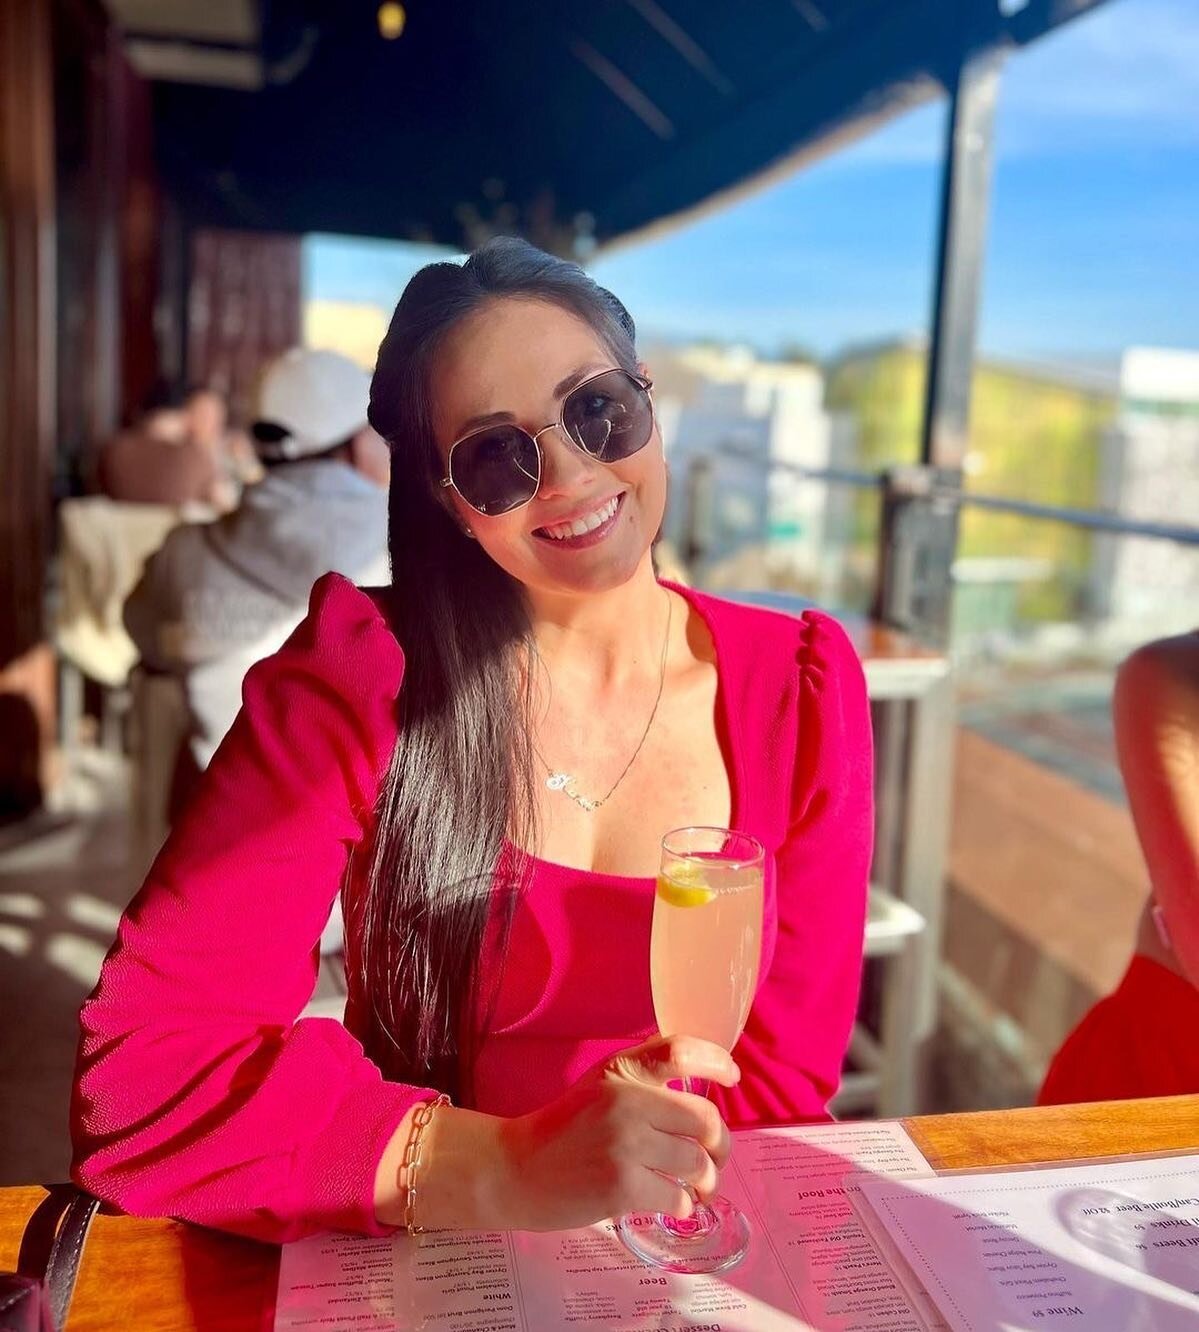 Join us for lunch, happy hour &amp; dinner this week at Walnut Creek&rsquo;s only rooftop! 🤩 Link in bio to make reservations.

Thank you @karencomk for sharing this gorgeous photo with us! 😍 We hope to see you again soon at&nbsp;Rooftop!&nbsp;🥂 #